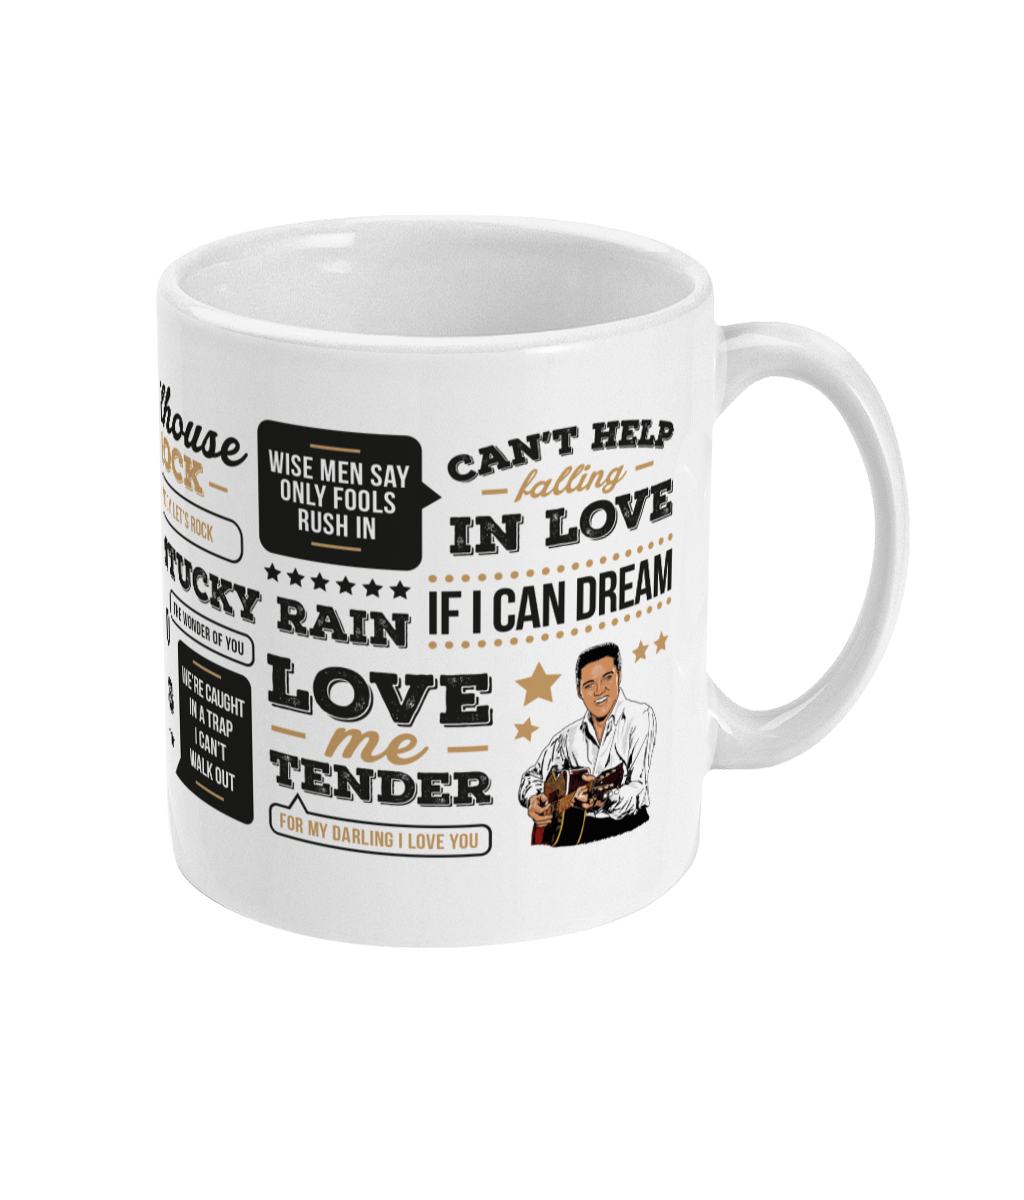 Mug featuring illustration of Elvis of 'The King' and includes the names of some of the most popular lines from his most loved songs from over the years,  including 'suspicious minds', 'love me tender' and 'jailhouse rock'. 